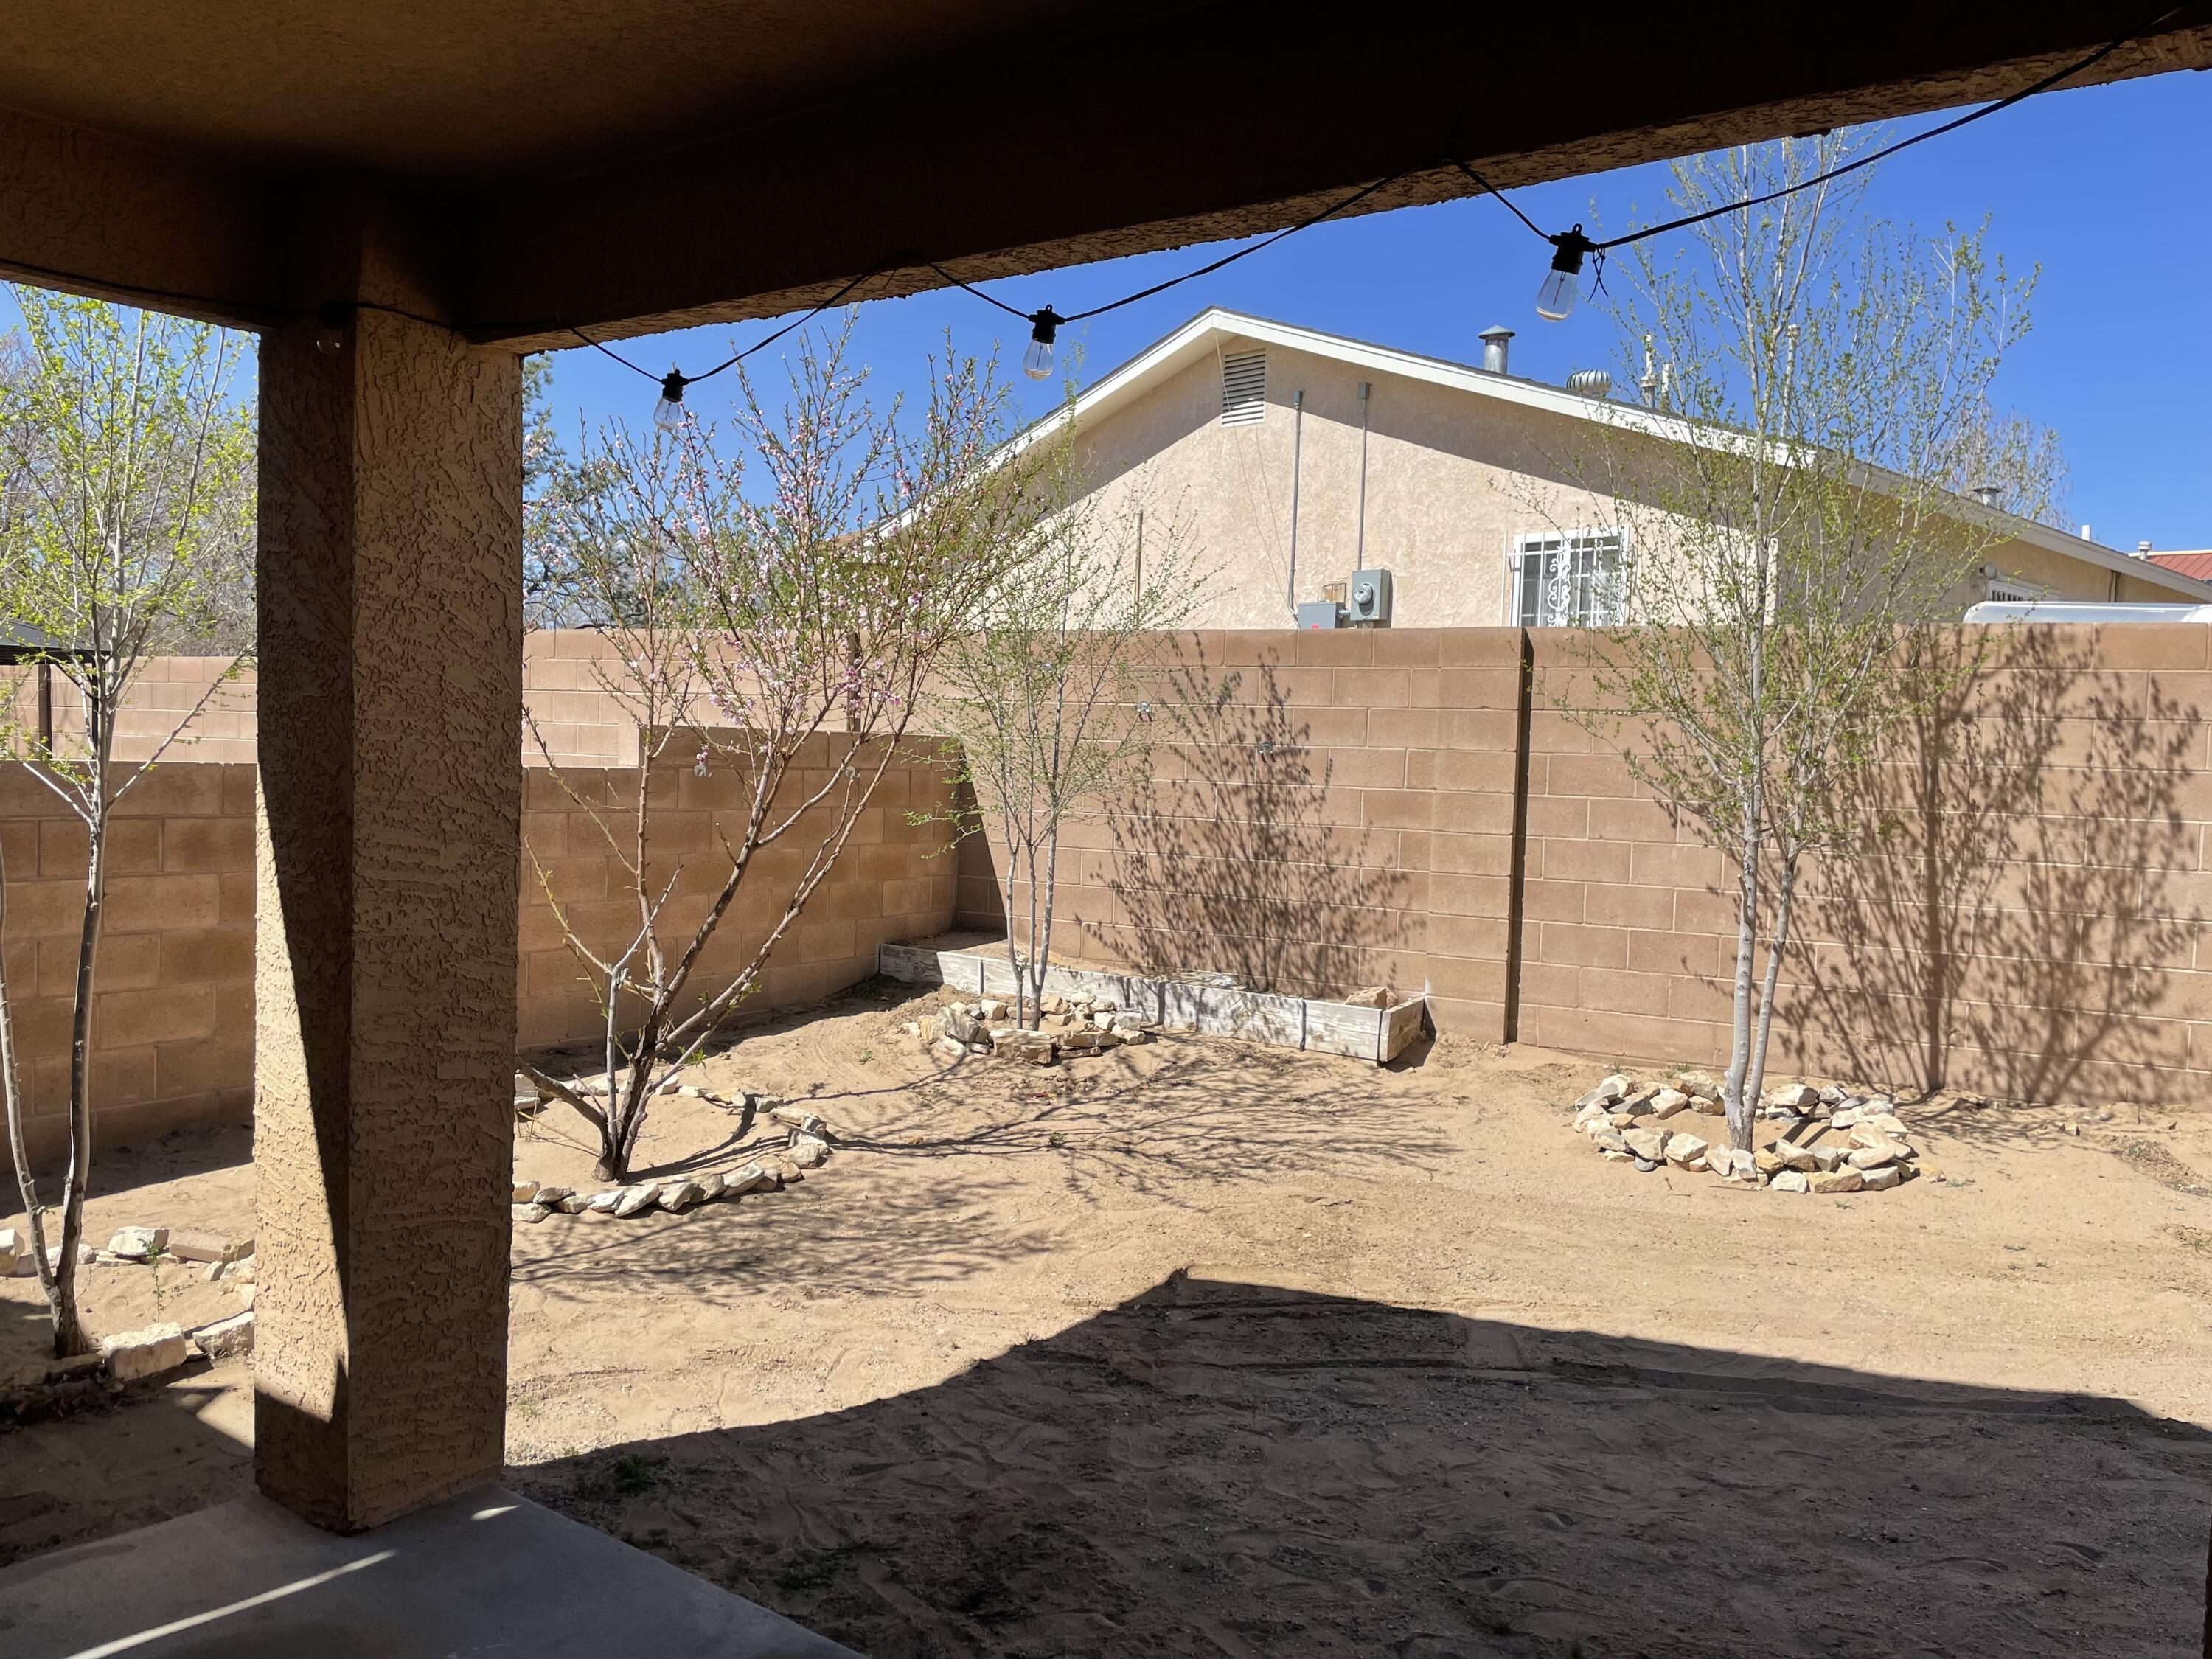 1335 Amole Drive SW, Albuquerque, New Mexico 87121, 4 Bedrooms Bedrooms, ,3 BathroomsBathrooms,Residential,For Sale,1335 Amole Drive SW,1058756